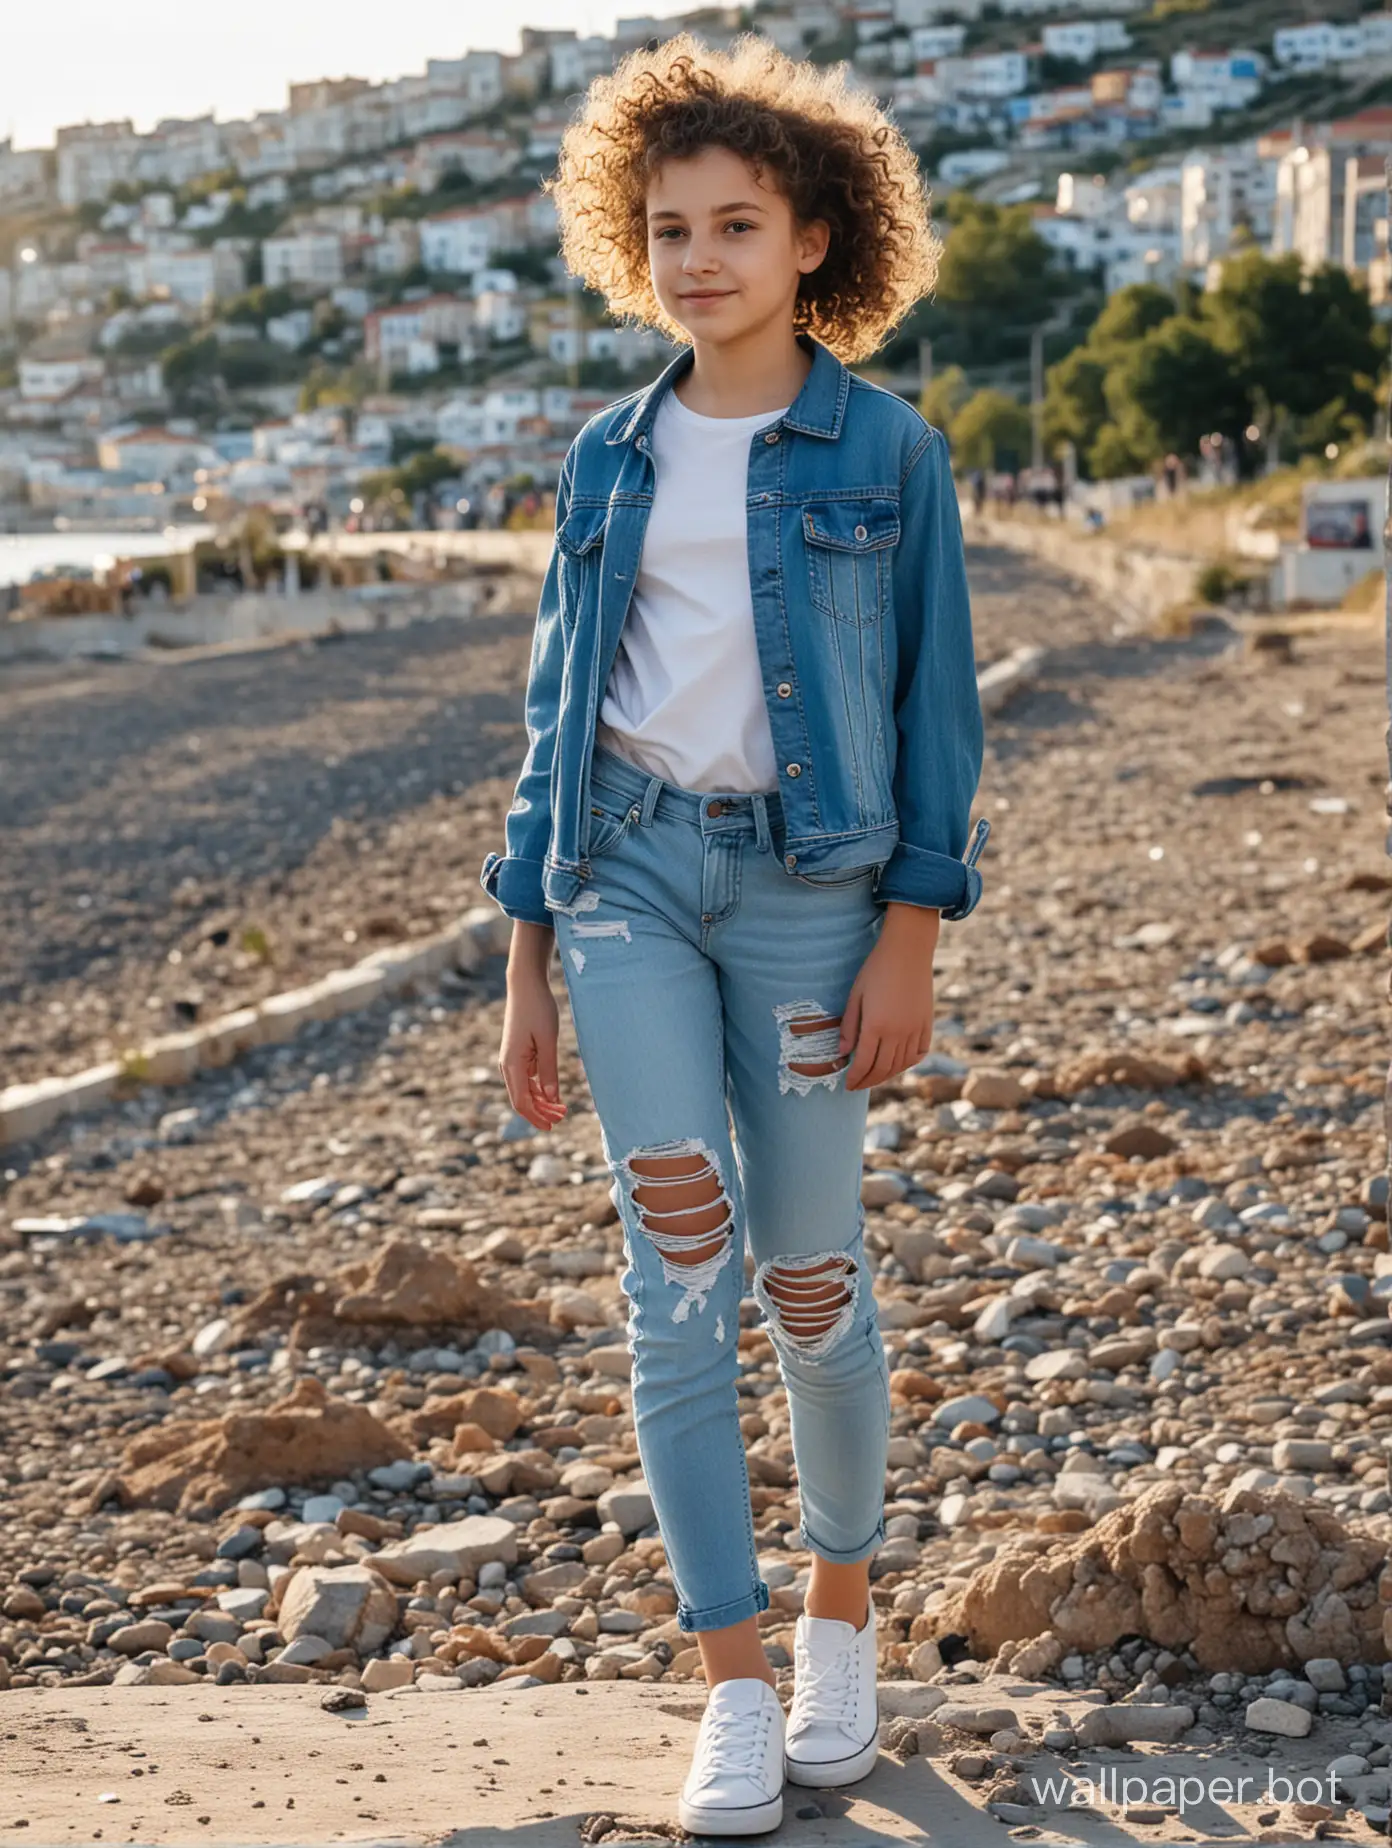 CurlClad-Girl-in-Light-Jeans-Exploring-Crimeas-Townscape